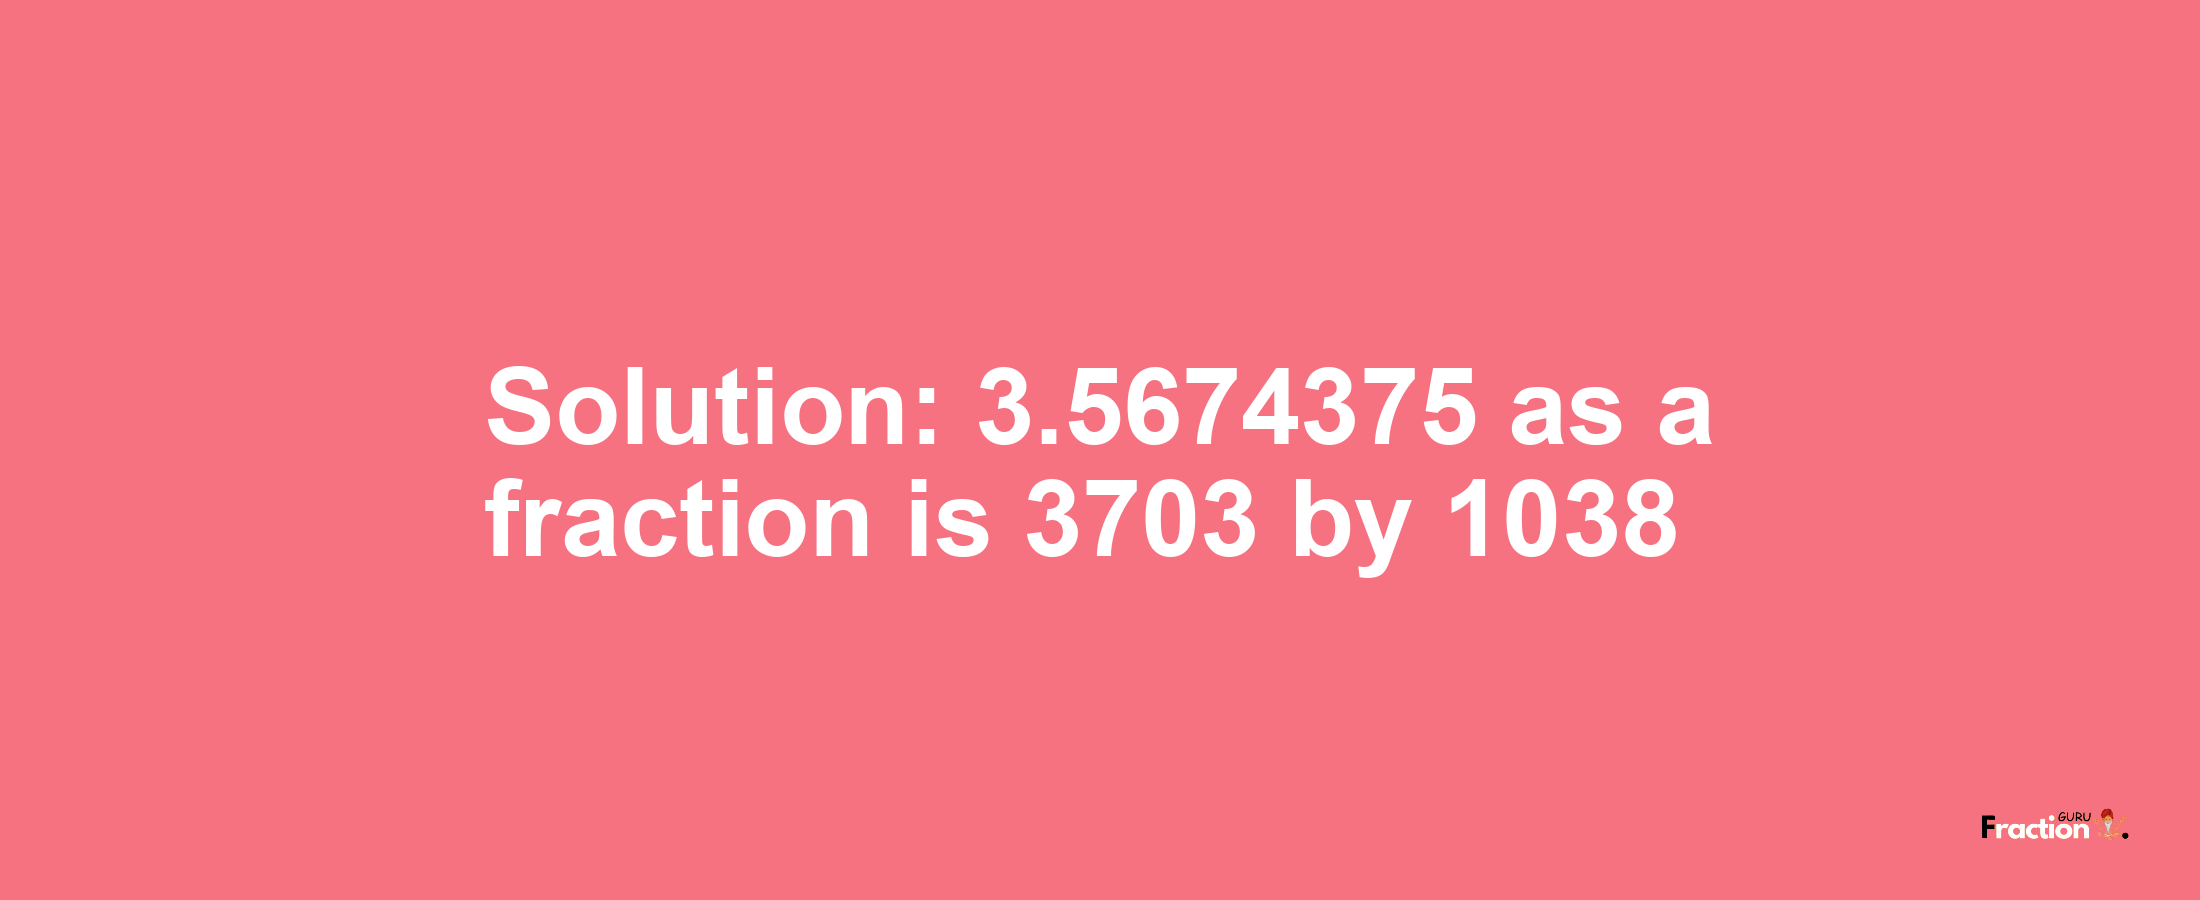 Solution:3.5674375 as a fraction is 3703/1038